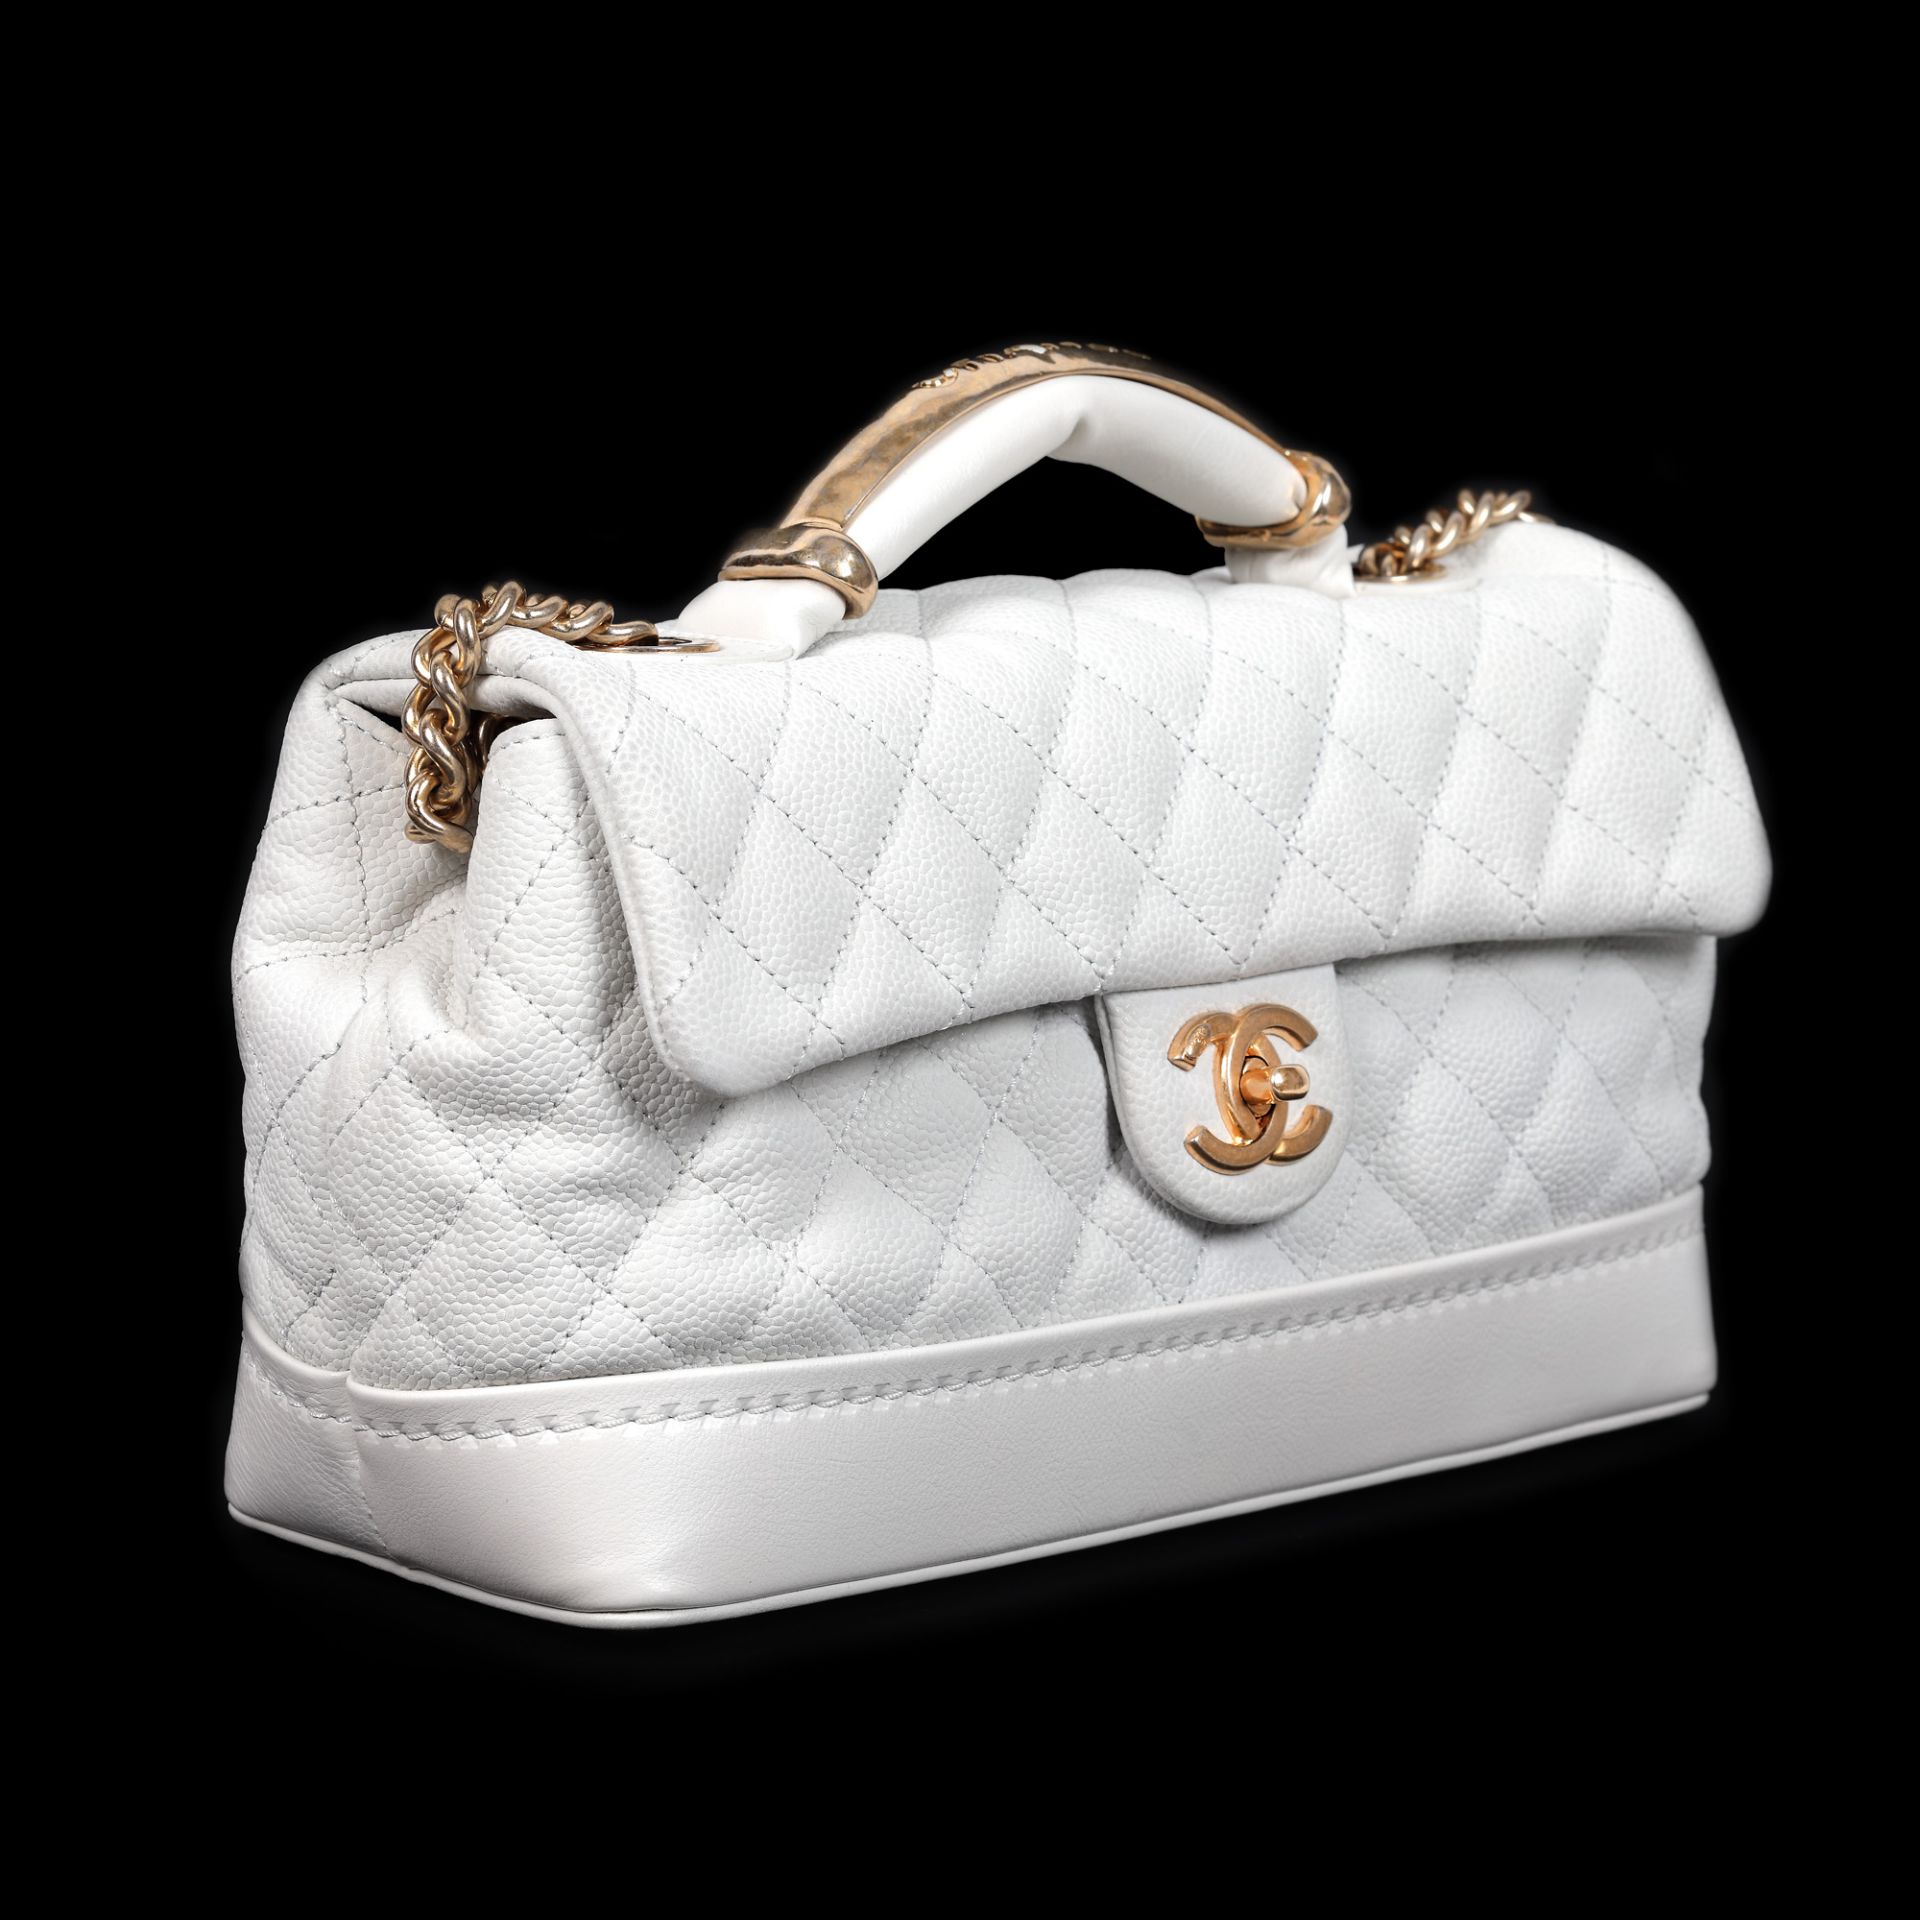 "Globe Trotter Flap" - Chanel bag, quilted leather, white - Image 2 of 6